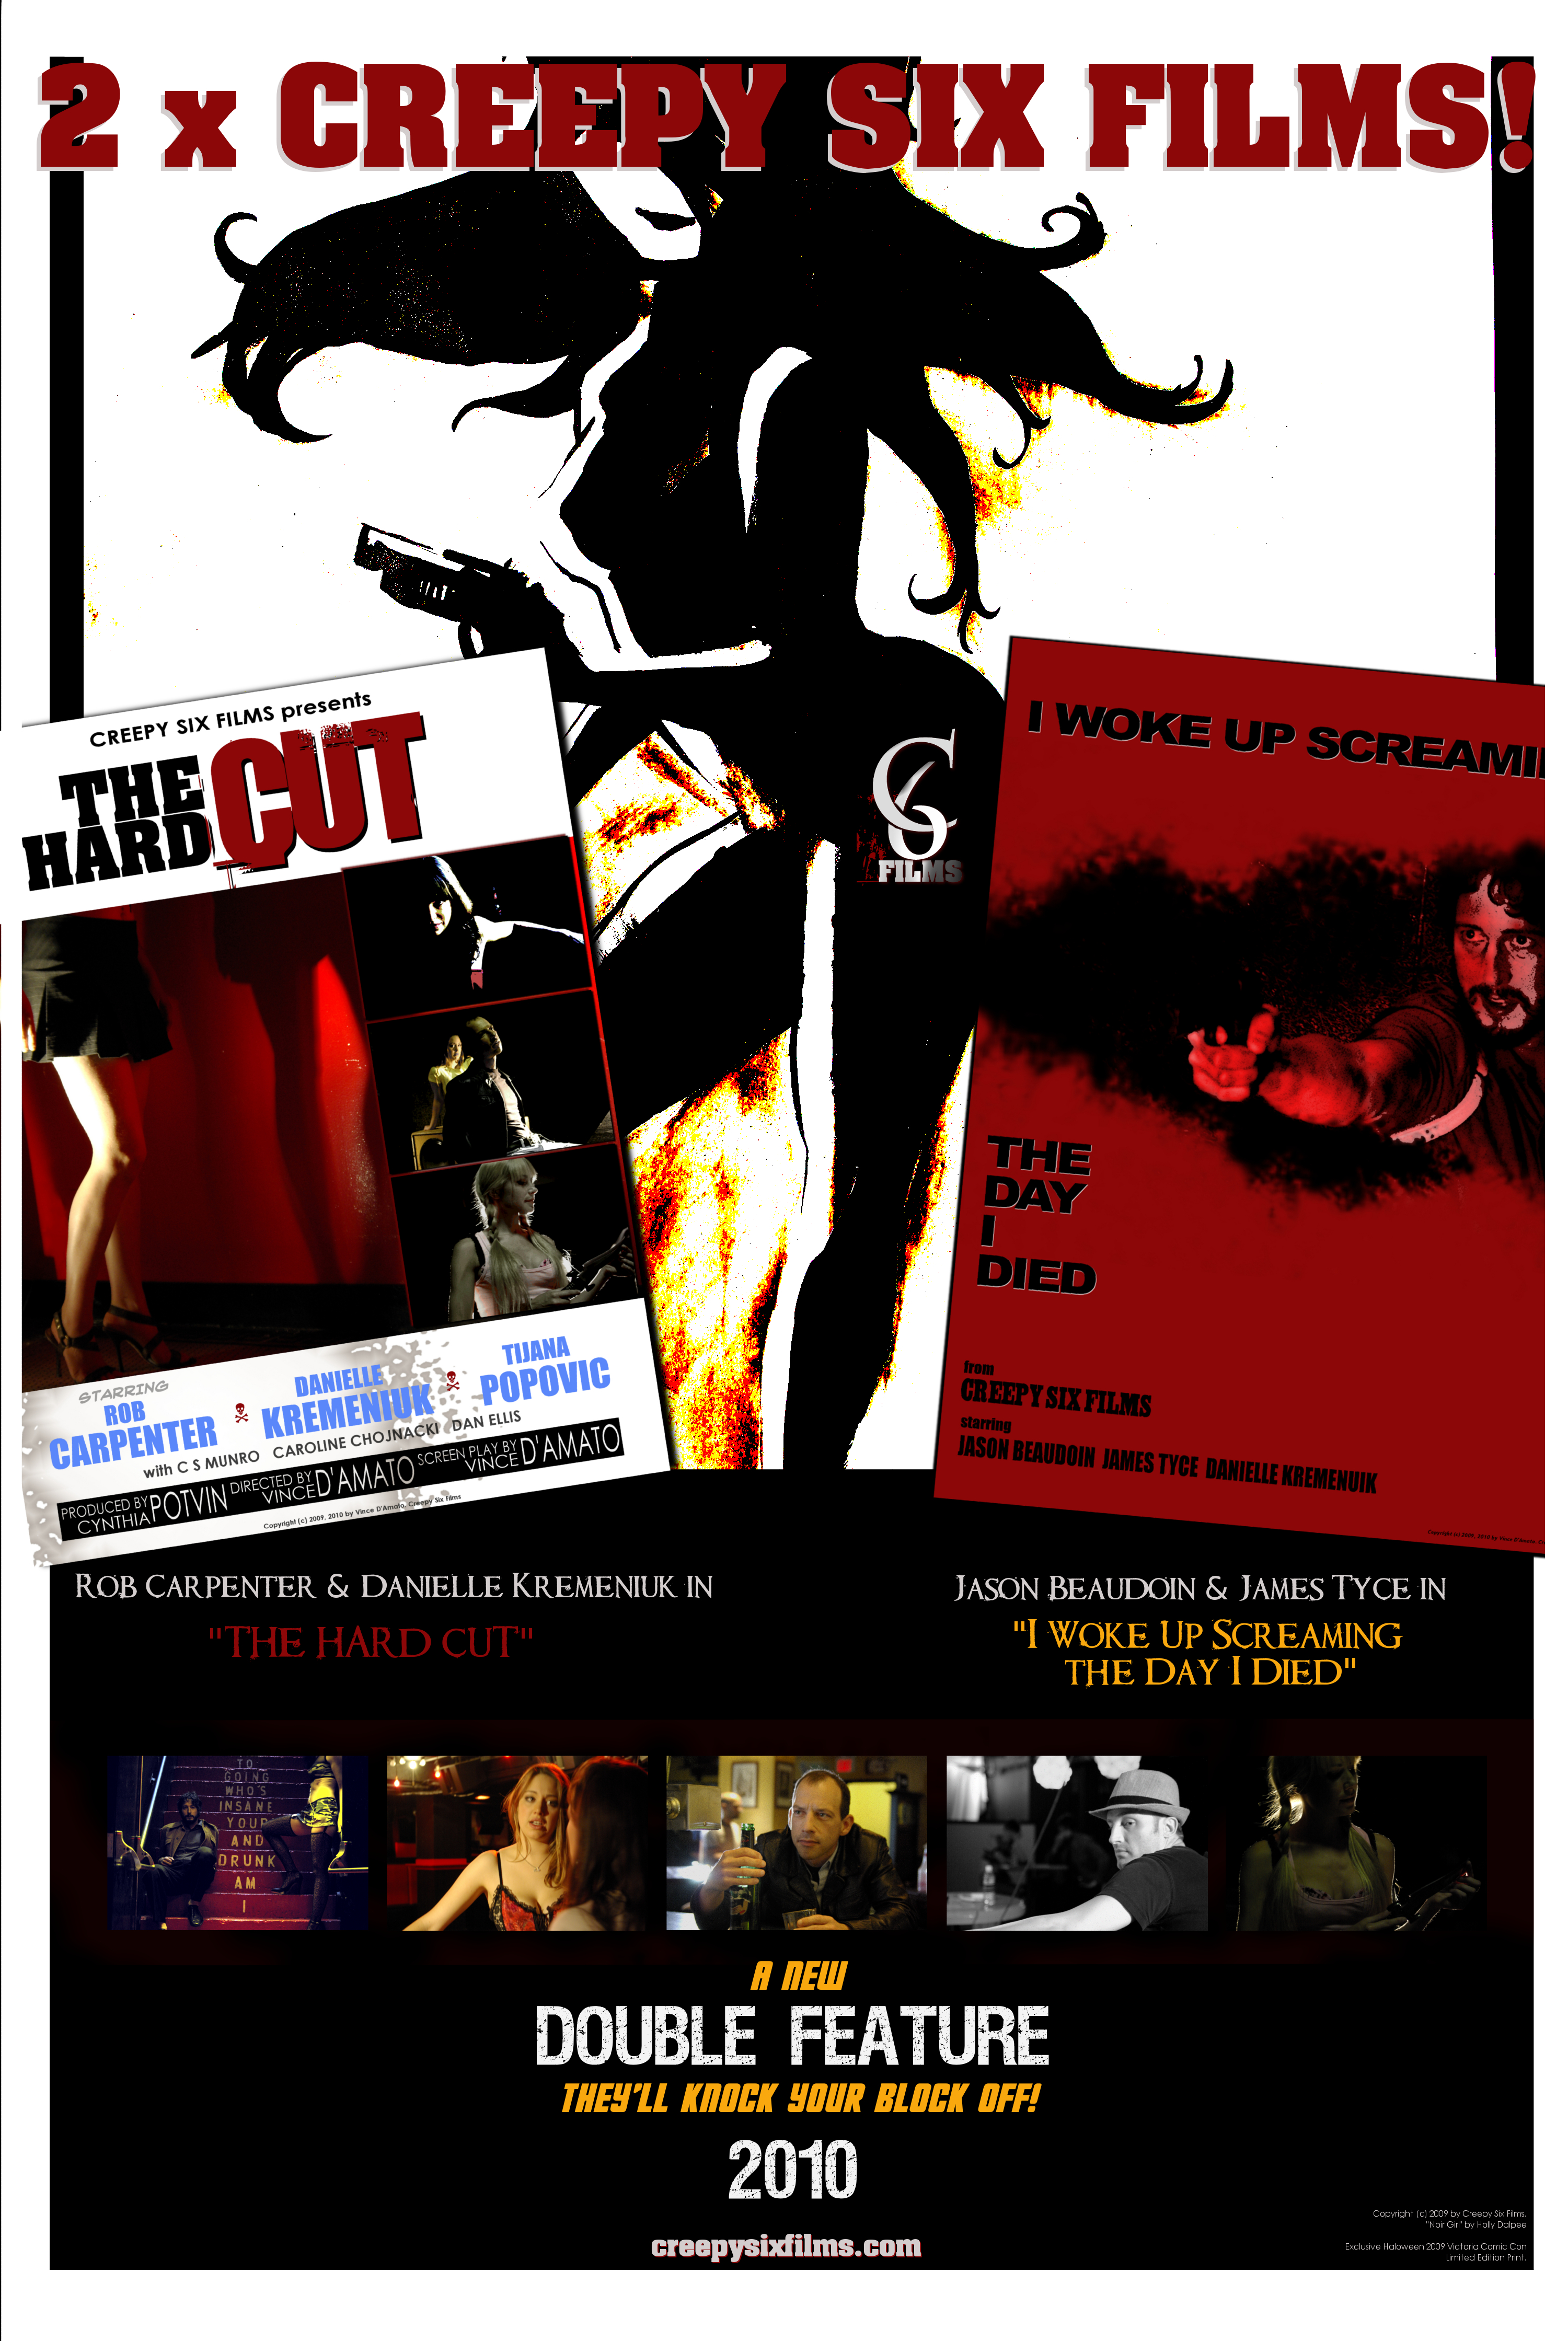 2 Feature independent films Starring Rob Carpenter Slated for 2010/2011 completion THE HARD CUT and I WOKE UP SCREAMING c/o Creepy Six Films